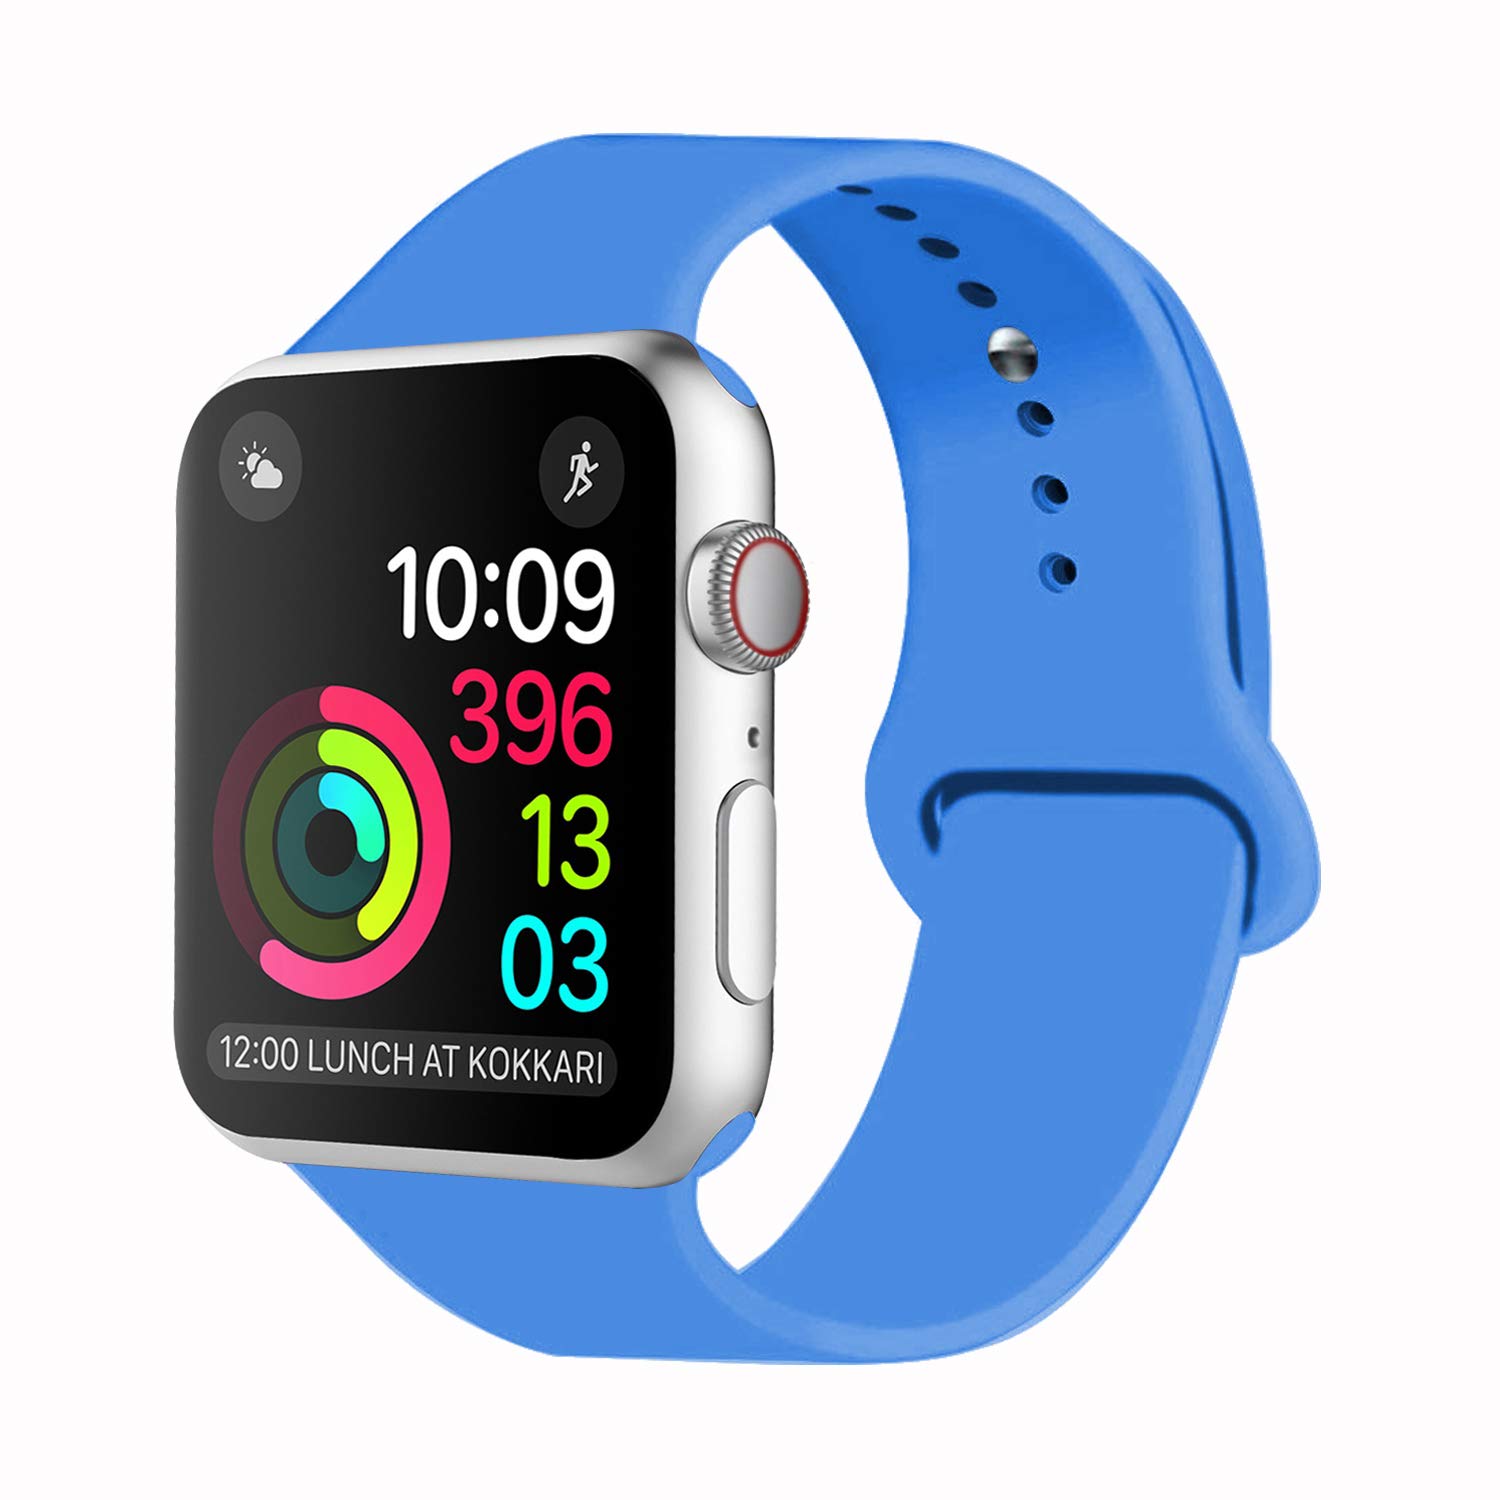 Pro Soft Silicone Sport Strap Wristband Replacement for Apple WATCH